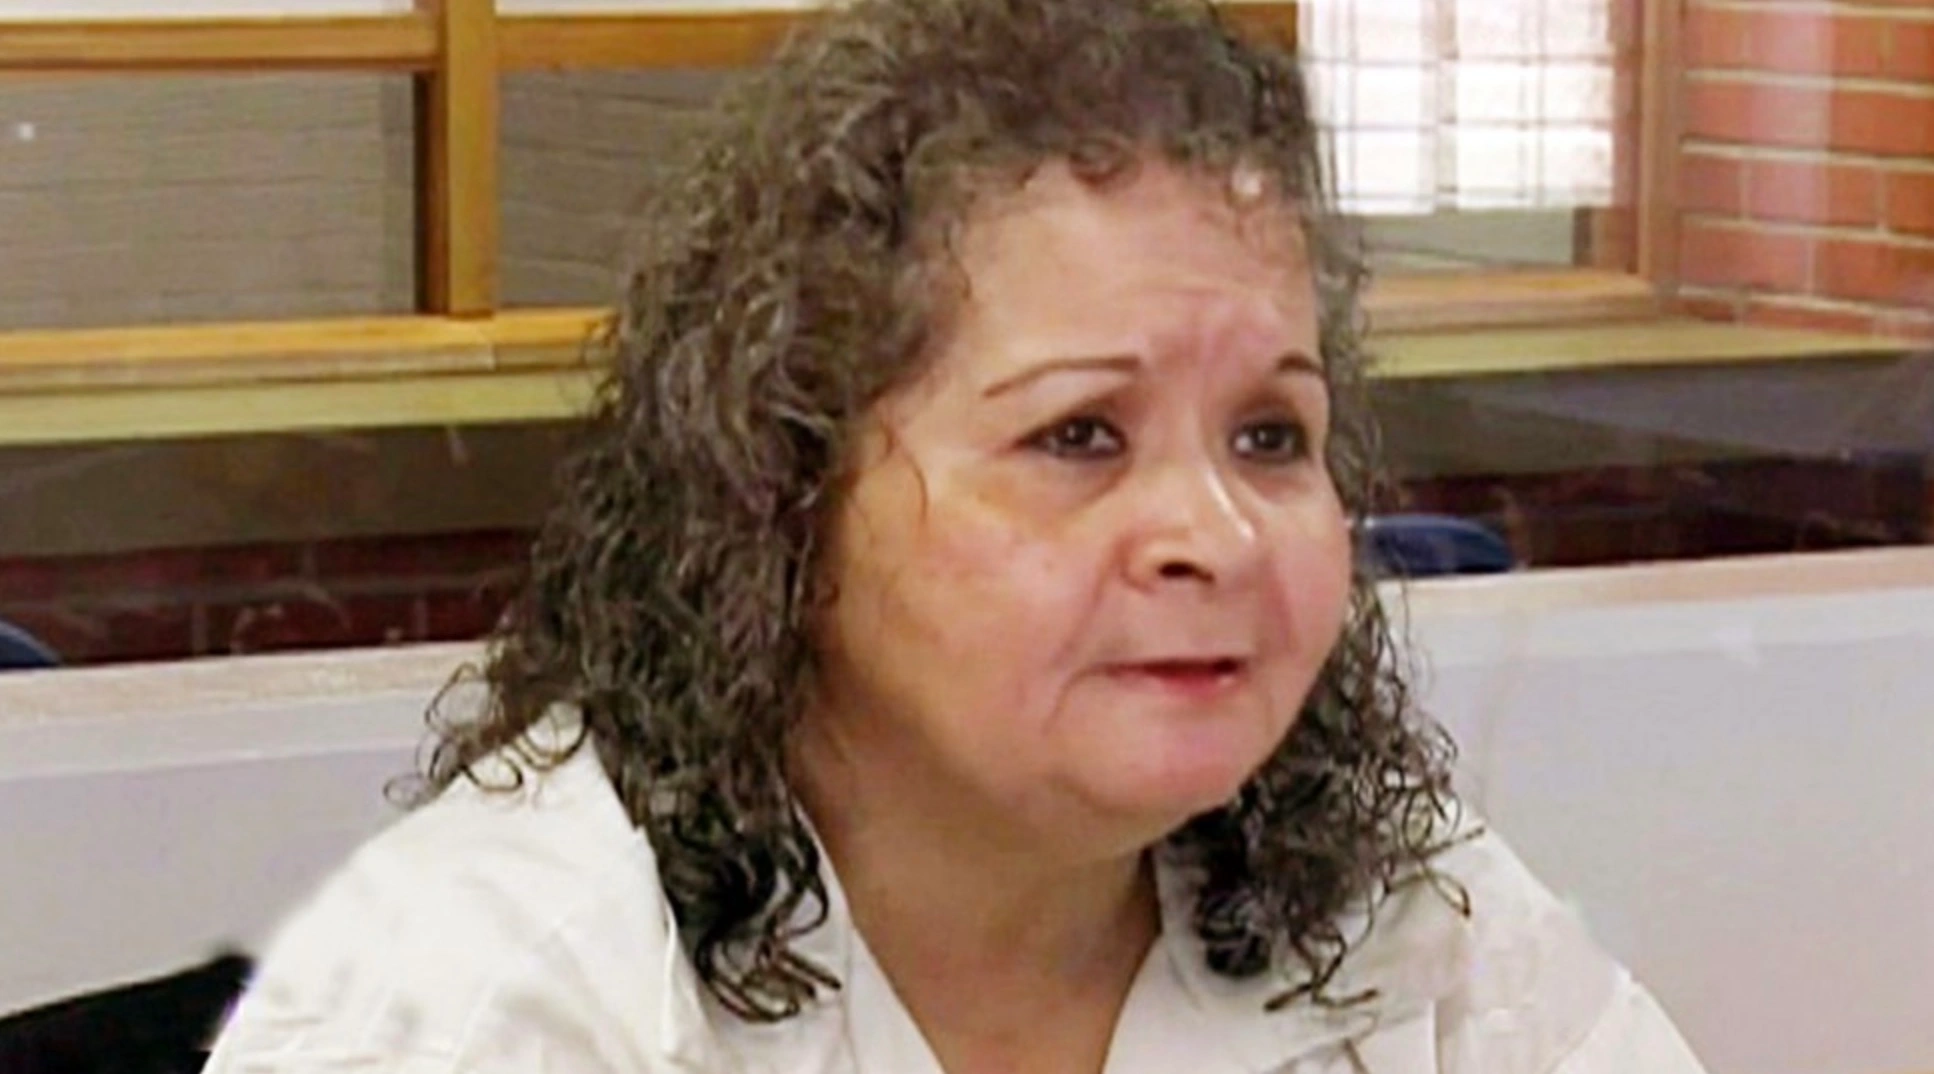 Who Is Yolanda Saldivar? What Happened To Her? All Information Here